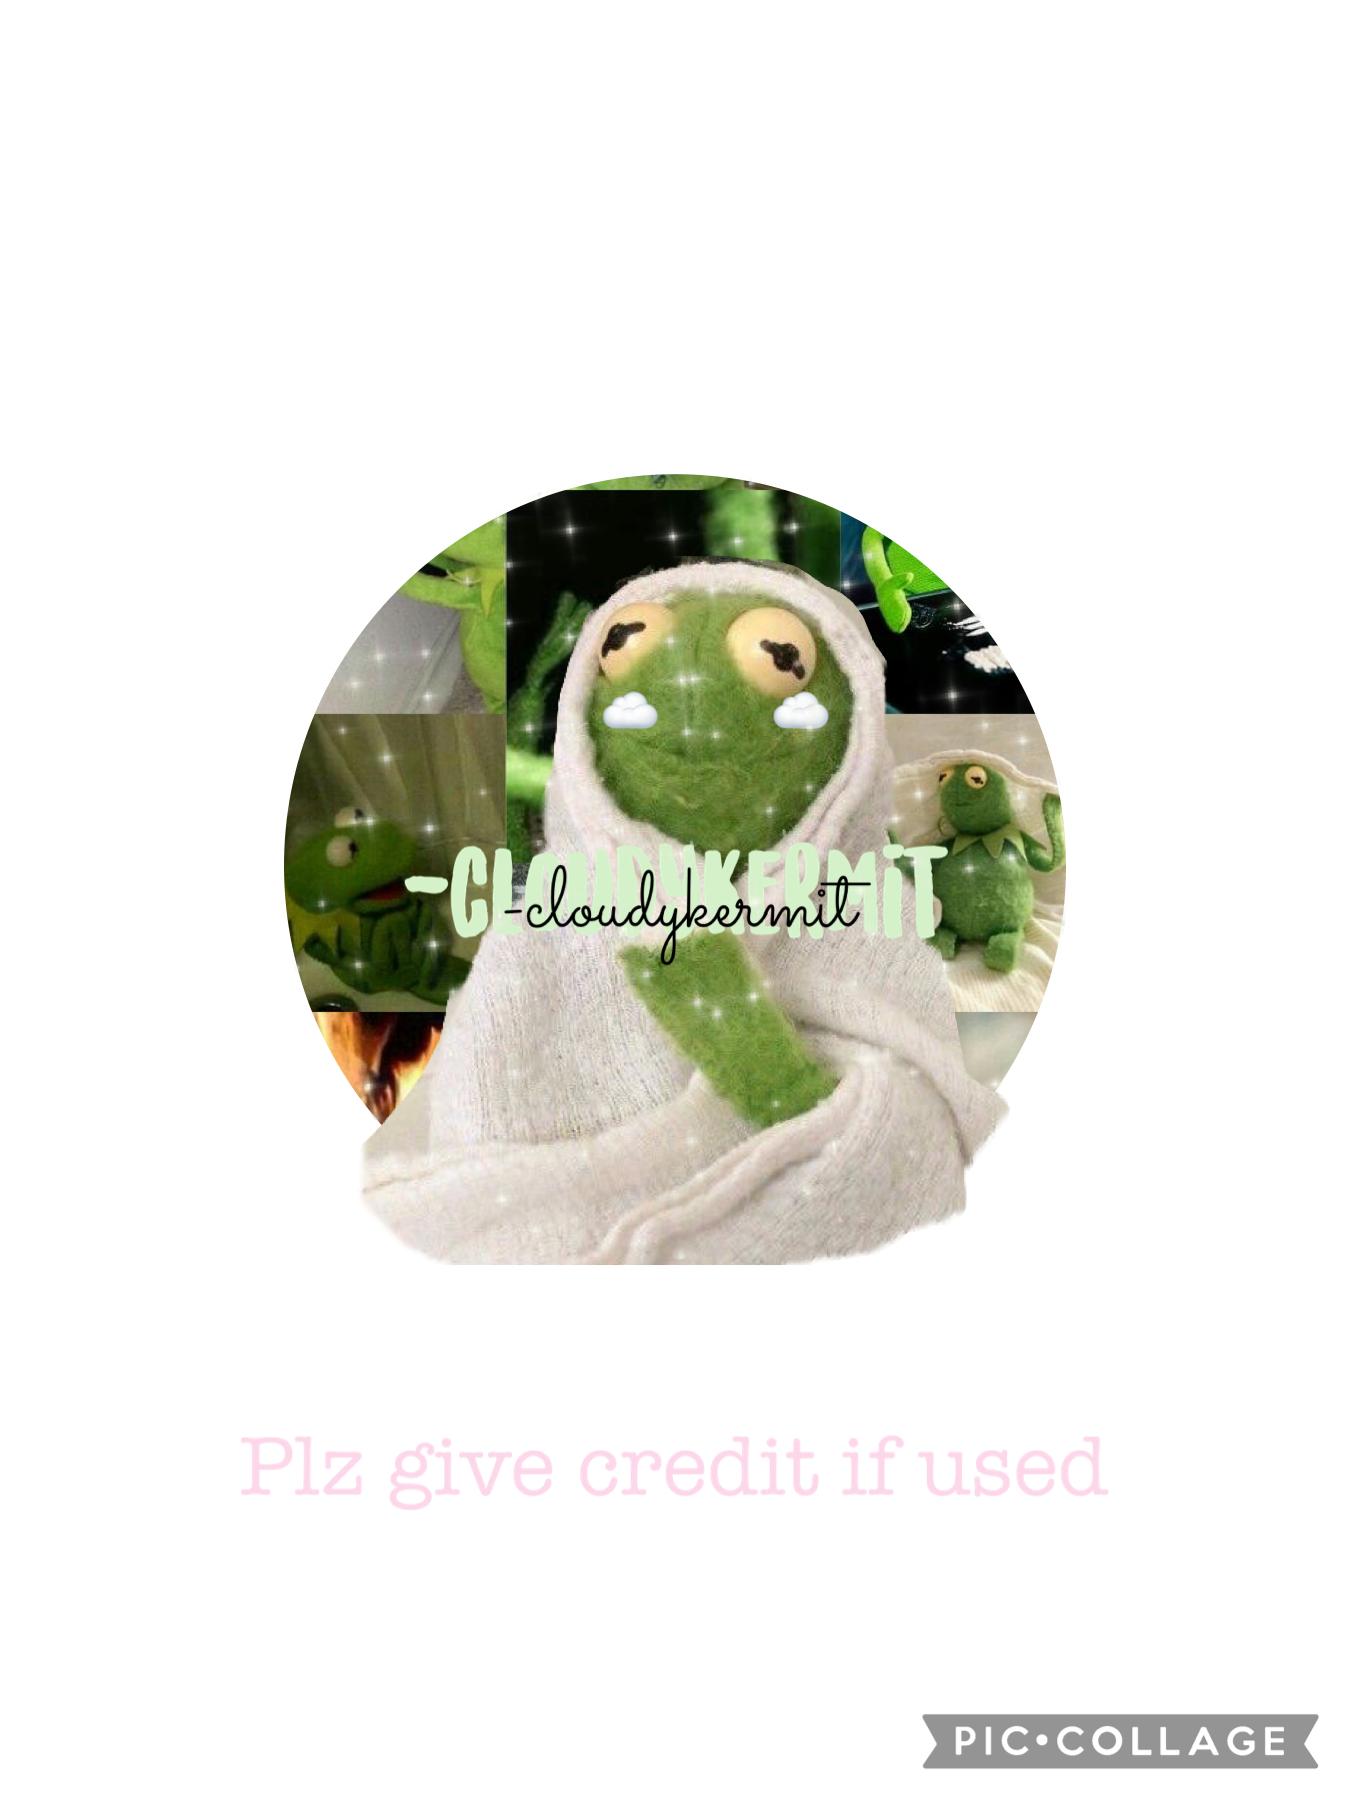                                       🐸tap🐸
Icon for -cloudykermit sry about the kermits Blanket sticking out 😂 